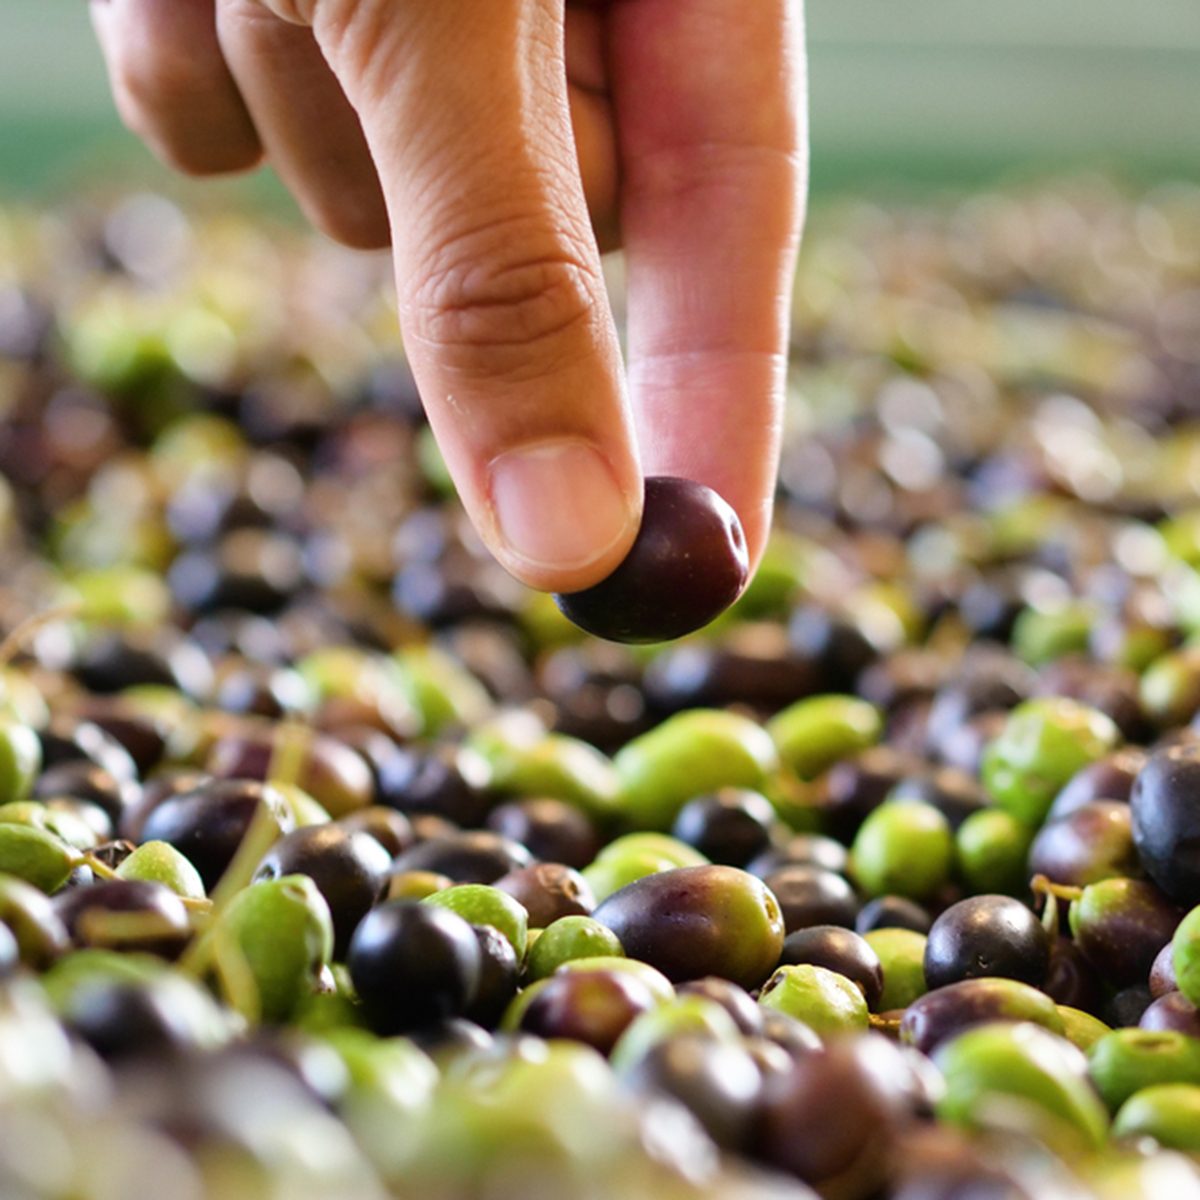 Hands take olives fresh off the tree to make olive oil made in Italy.